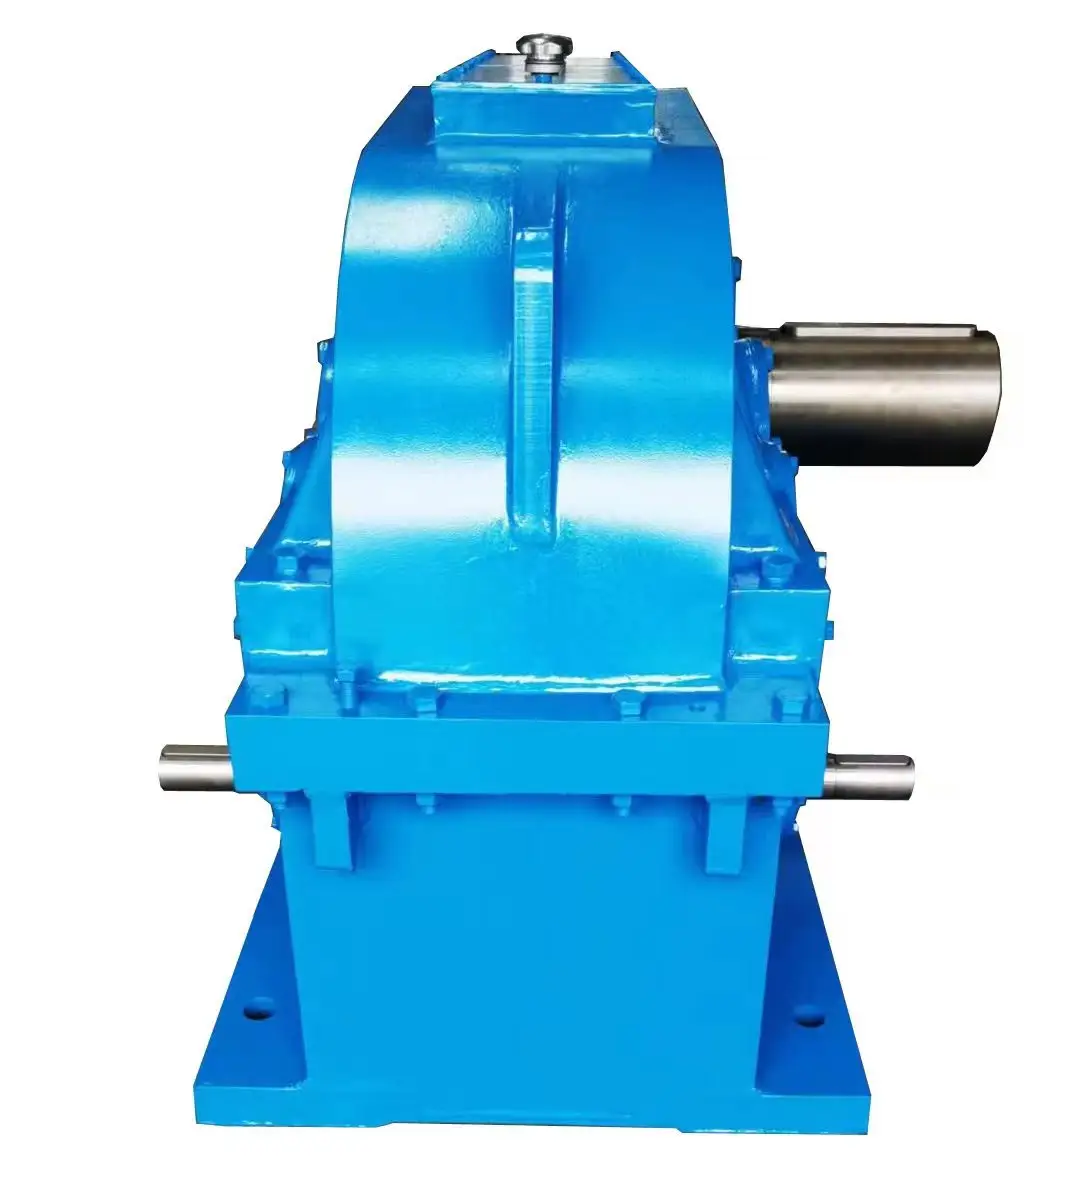 High Precision ZFY500 400KW Gear Reducer Parallel Shaft Reduction Gearbox reductores de engranajes made in china